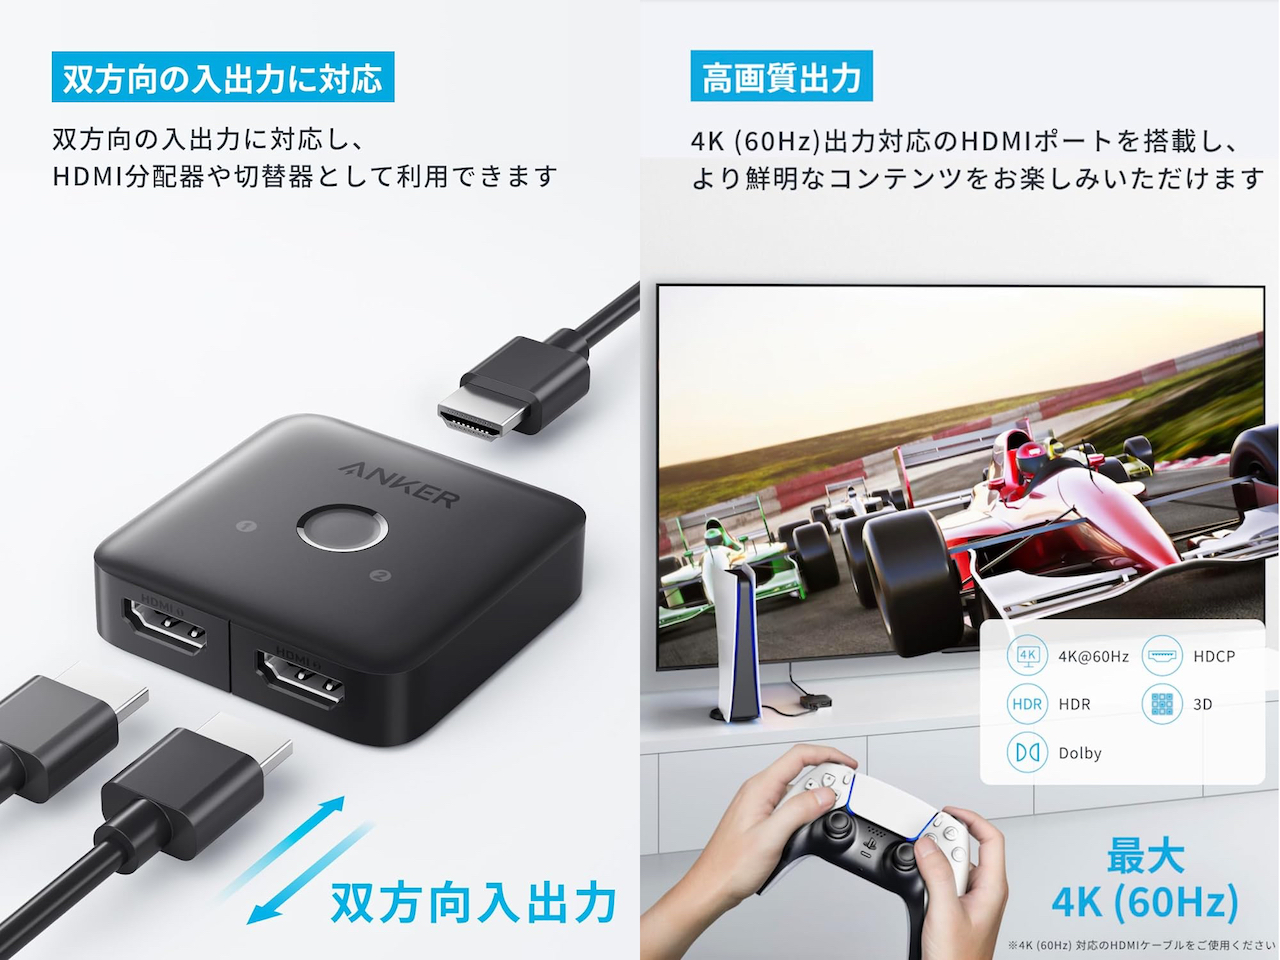 Anker HDMI Switch (2-in-1 Out, 4K HDMI)の仕様